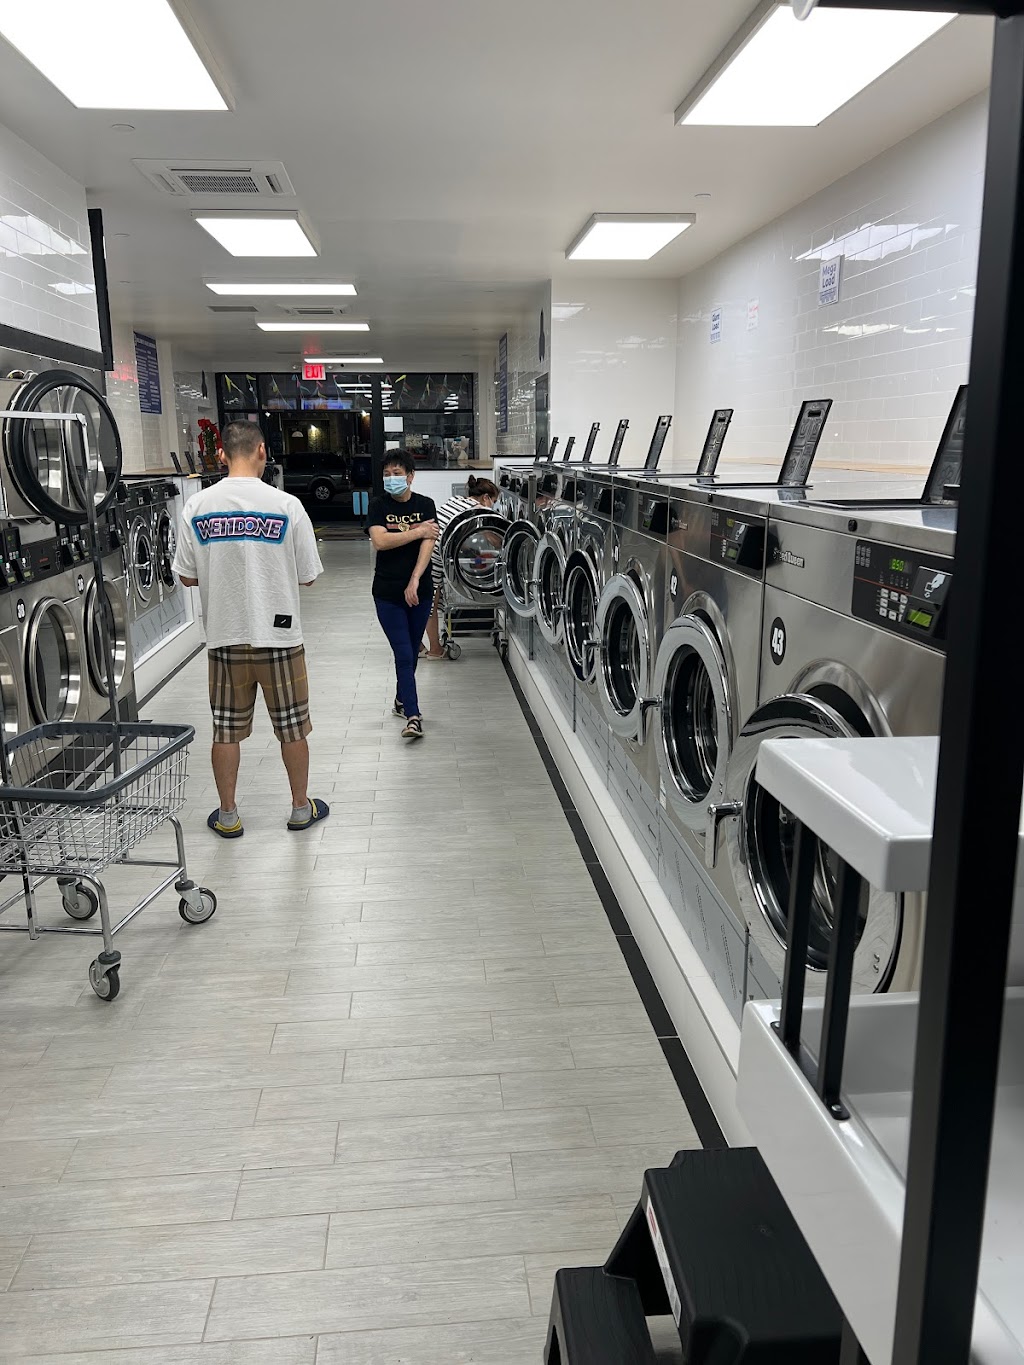 Anjie Laundromat | 16110 46th Ave, Queens, NY 11358 | Phone: (917) 285-2600